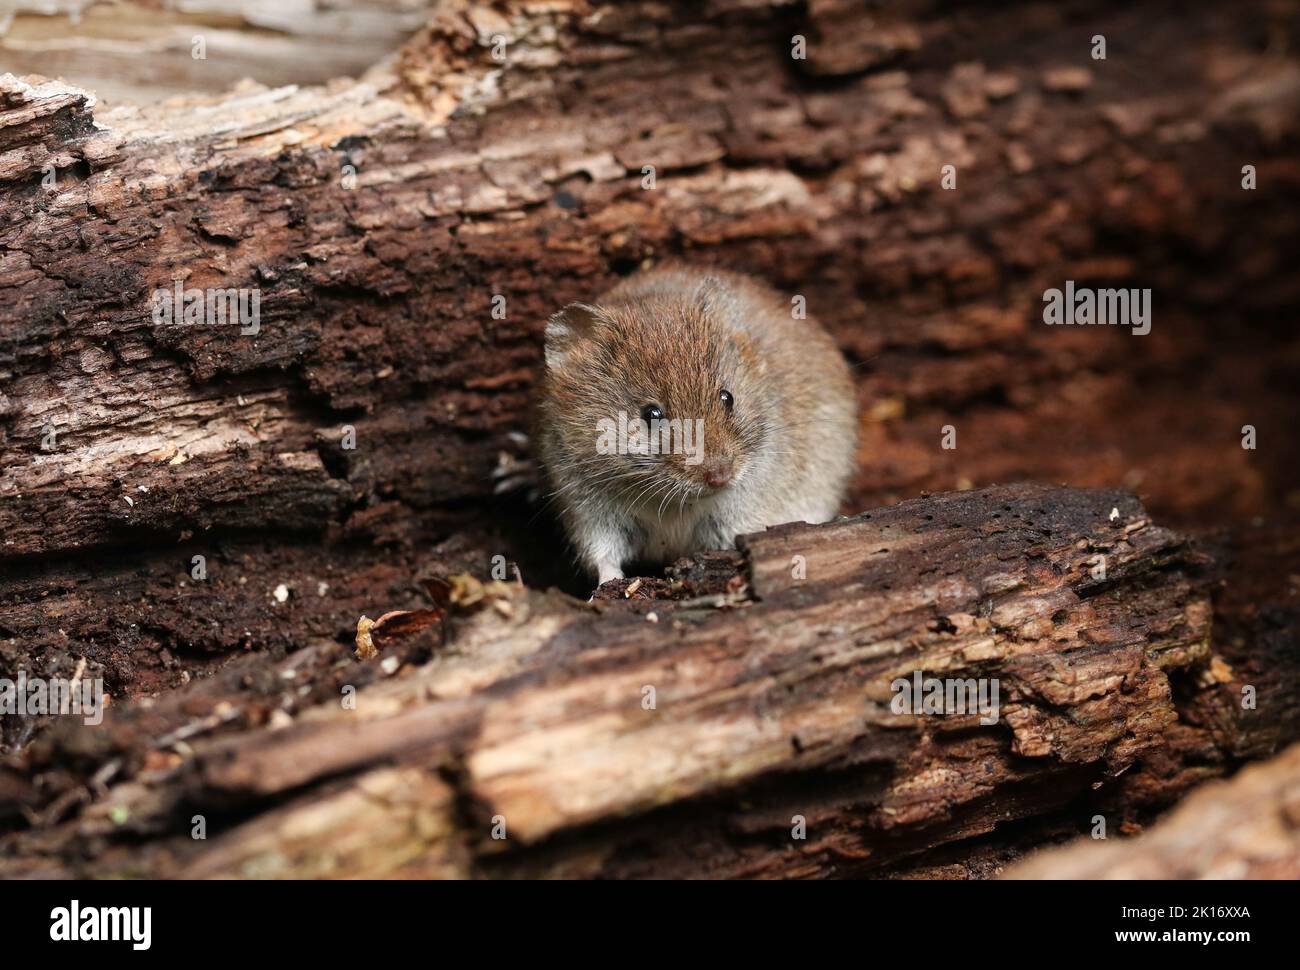 A cute wild Bank Vole, Myodes glareolus, foraging for food in a log pile. Stock Photo